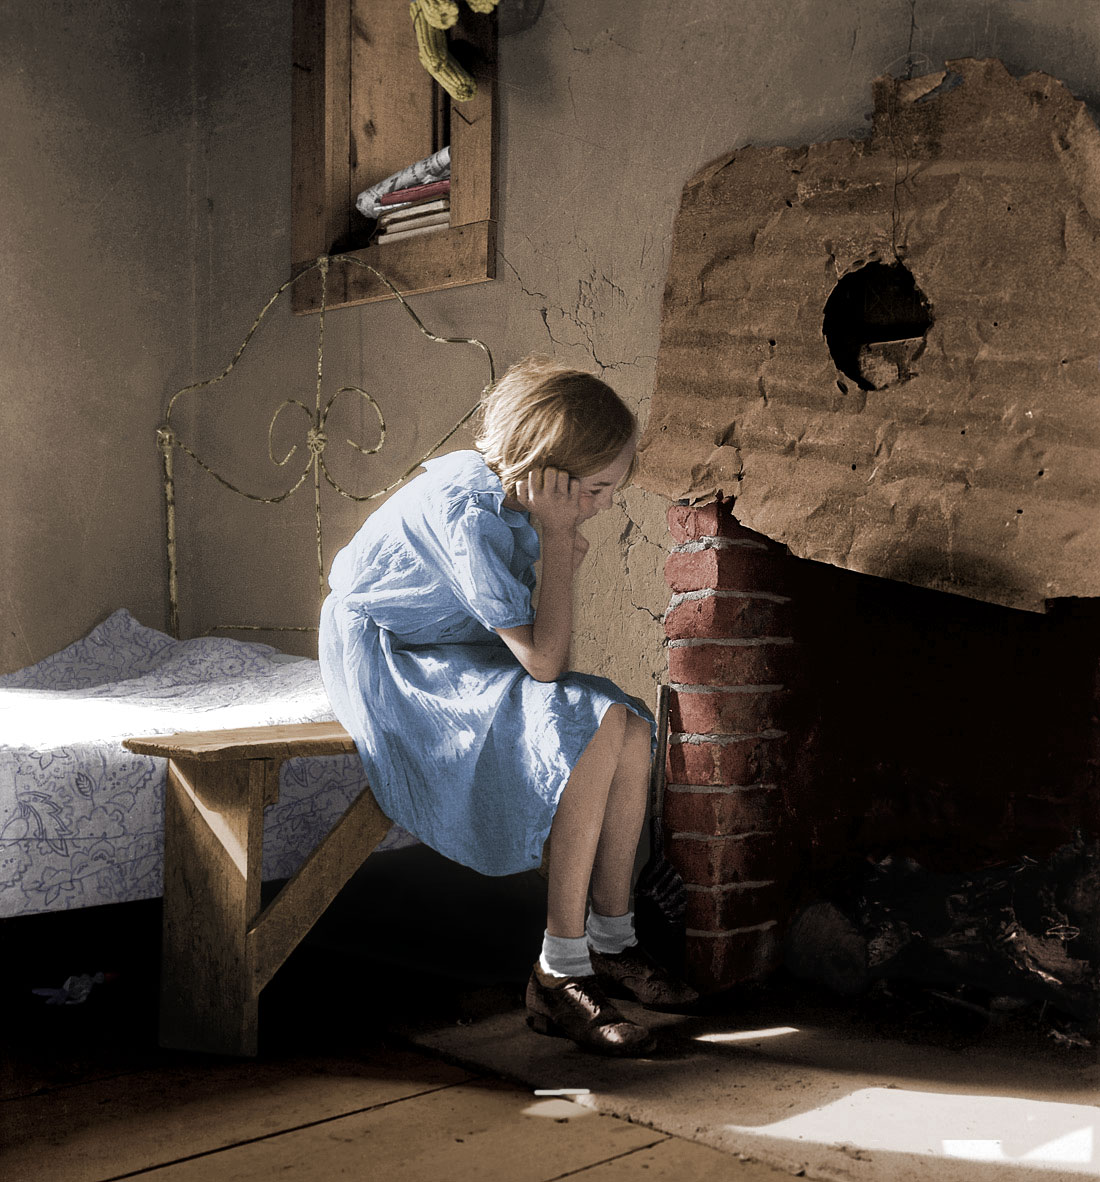 I took some creative license with the indistinct object under the bed, as I couldn't tell what it was. In my colorizaton, it has become a rather creepy abandoned clown doll. Image by Dorothea Lange. View full size.